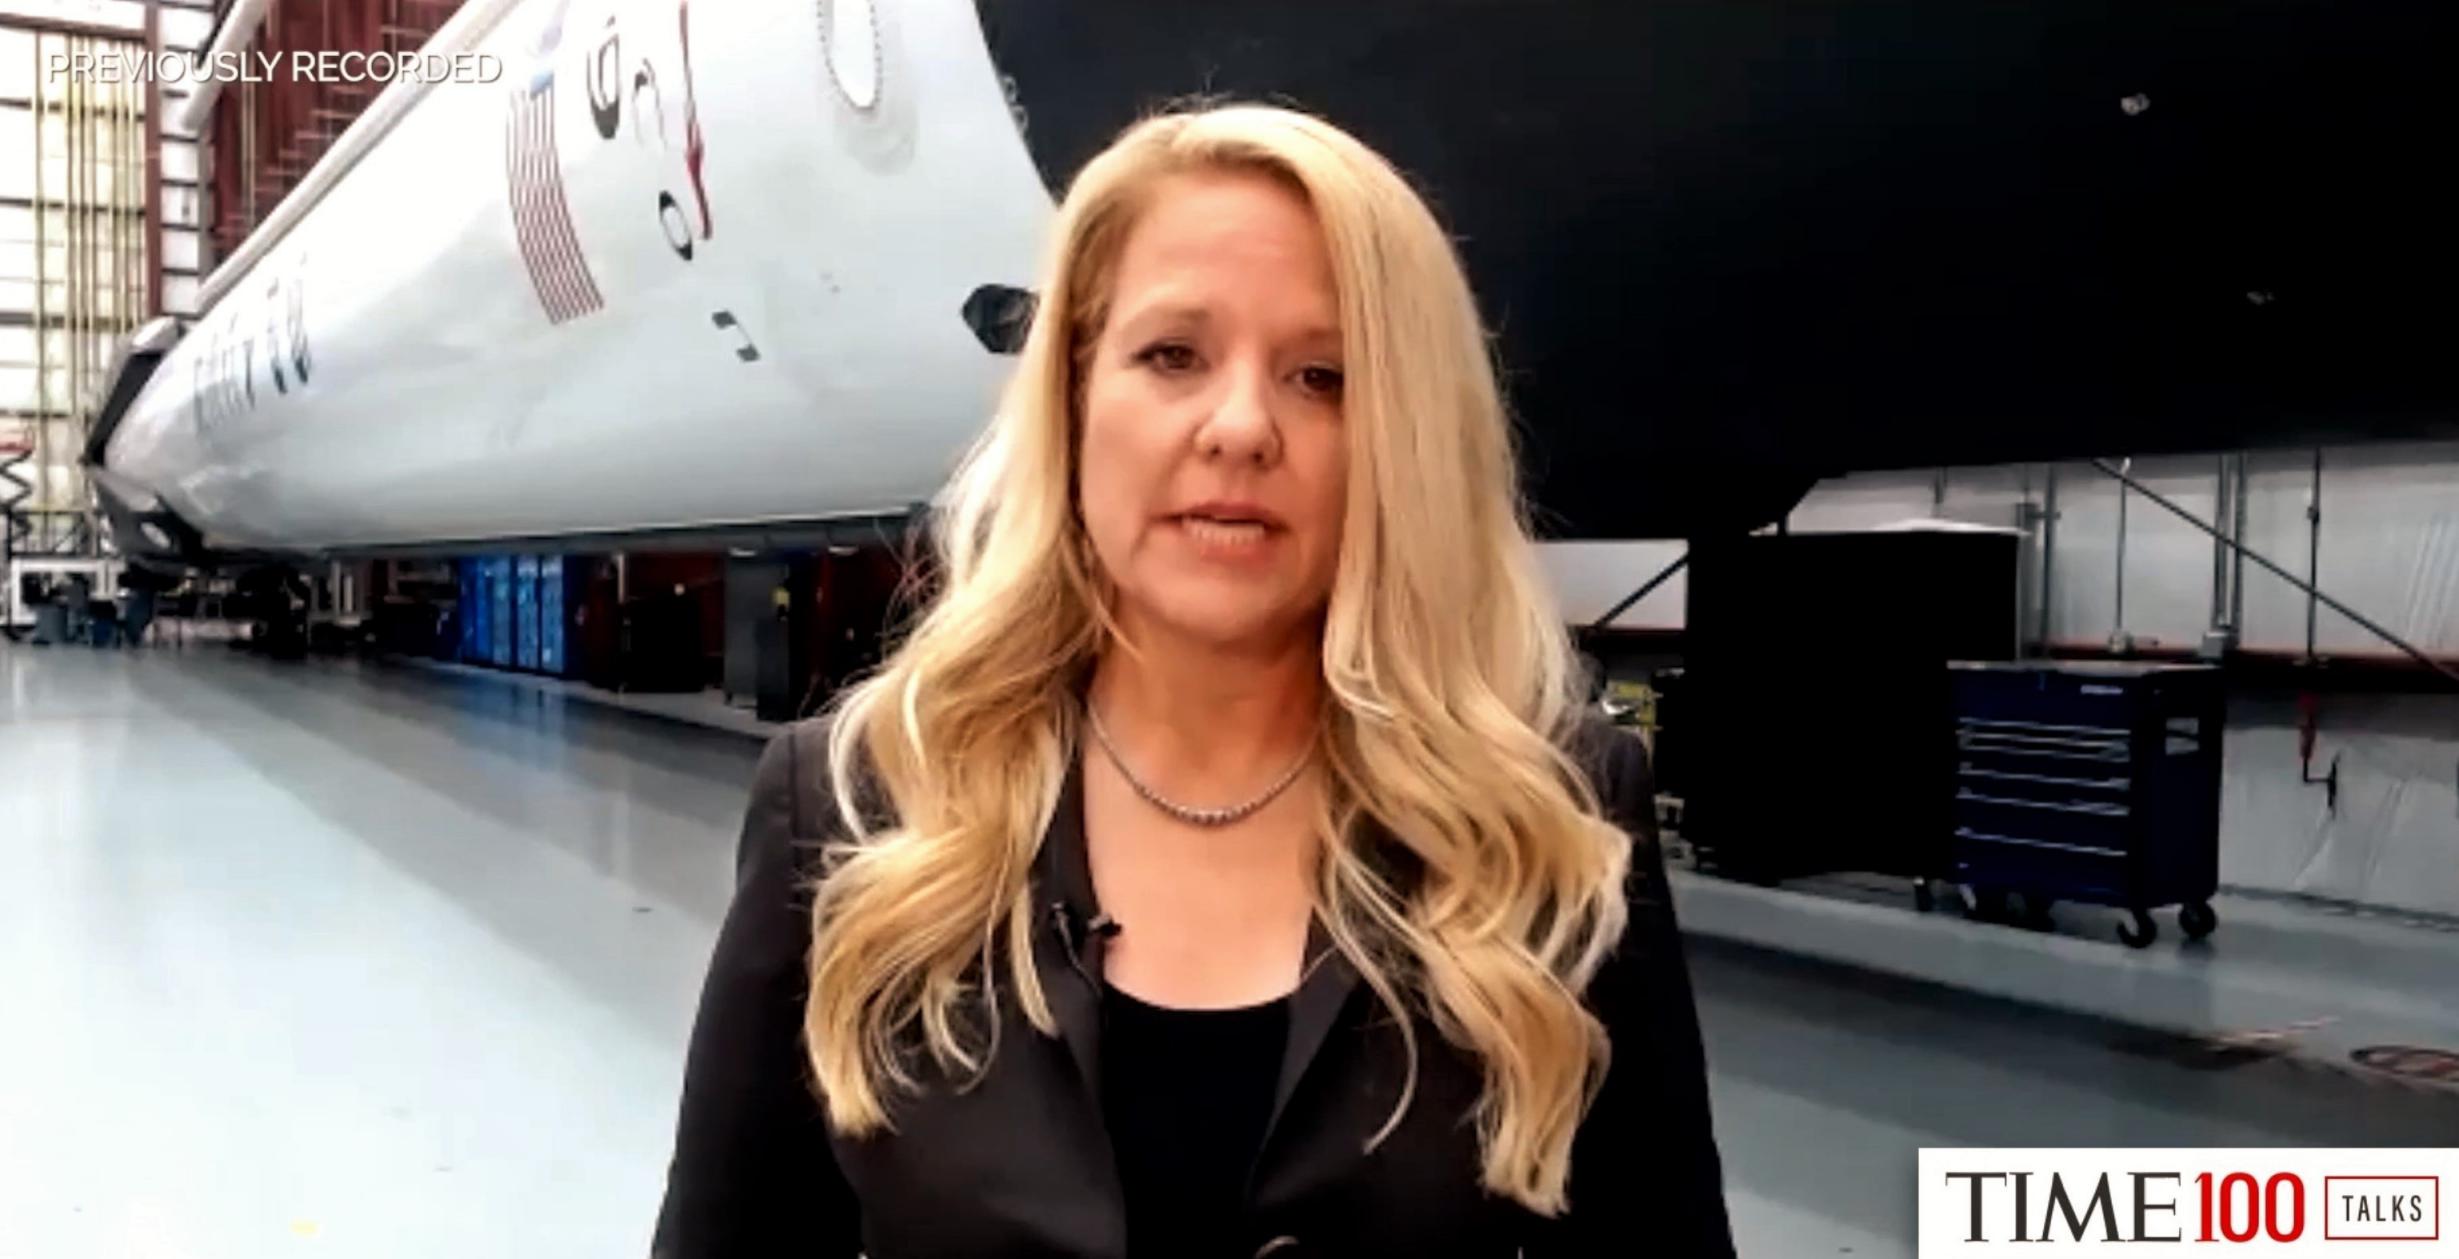 Crew Dragon Crew-1 Falcon 9 B1061 39A HIF Oct 2020 (TIME) Shotwell interview 1 crop (c)